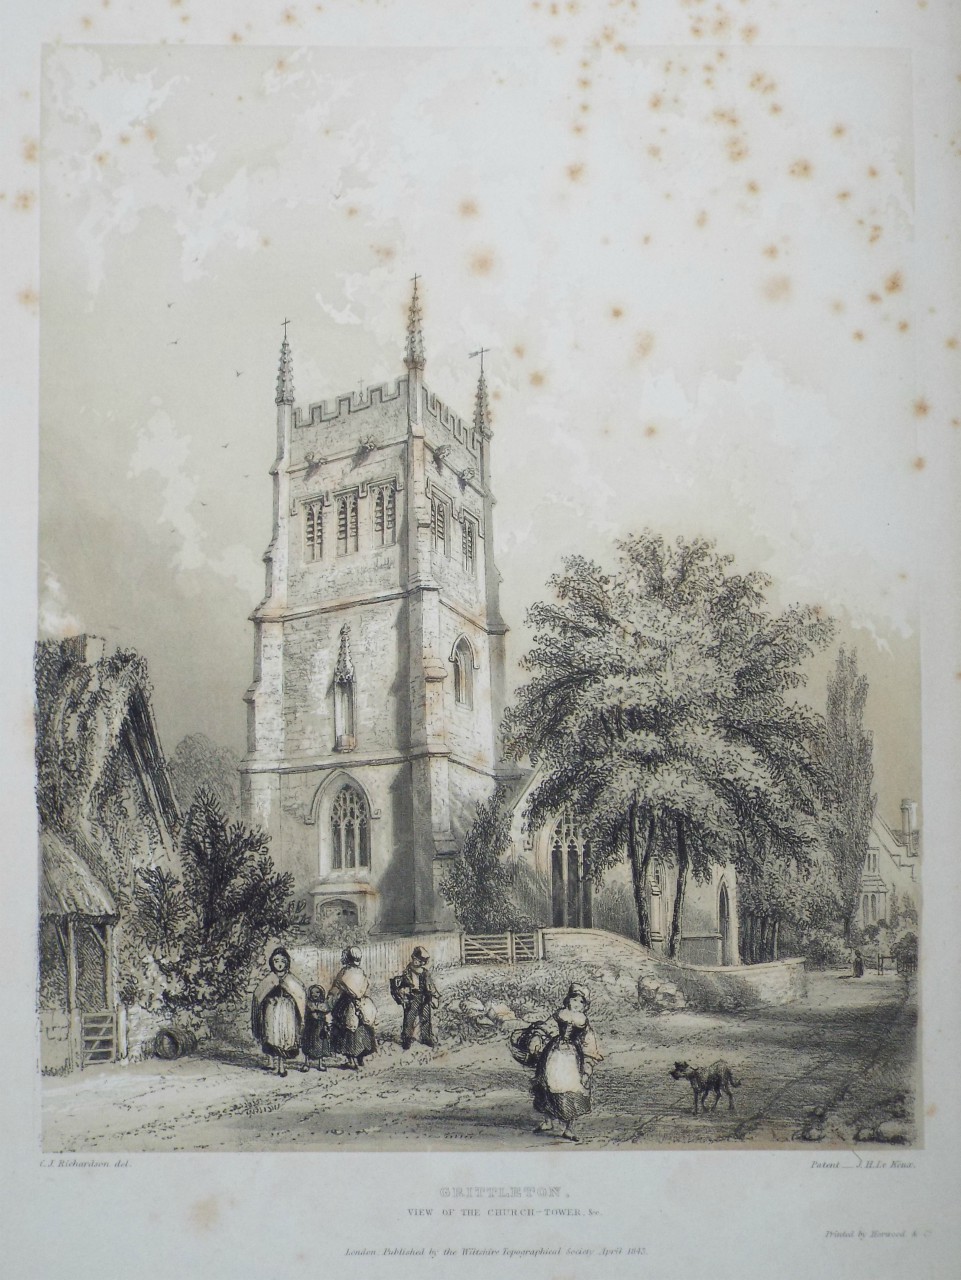 Lithograph - Grittleton,  View of the Church-Tower etc - Le